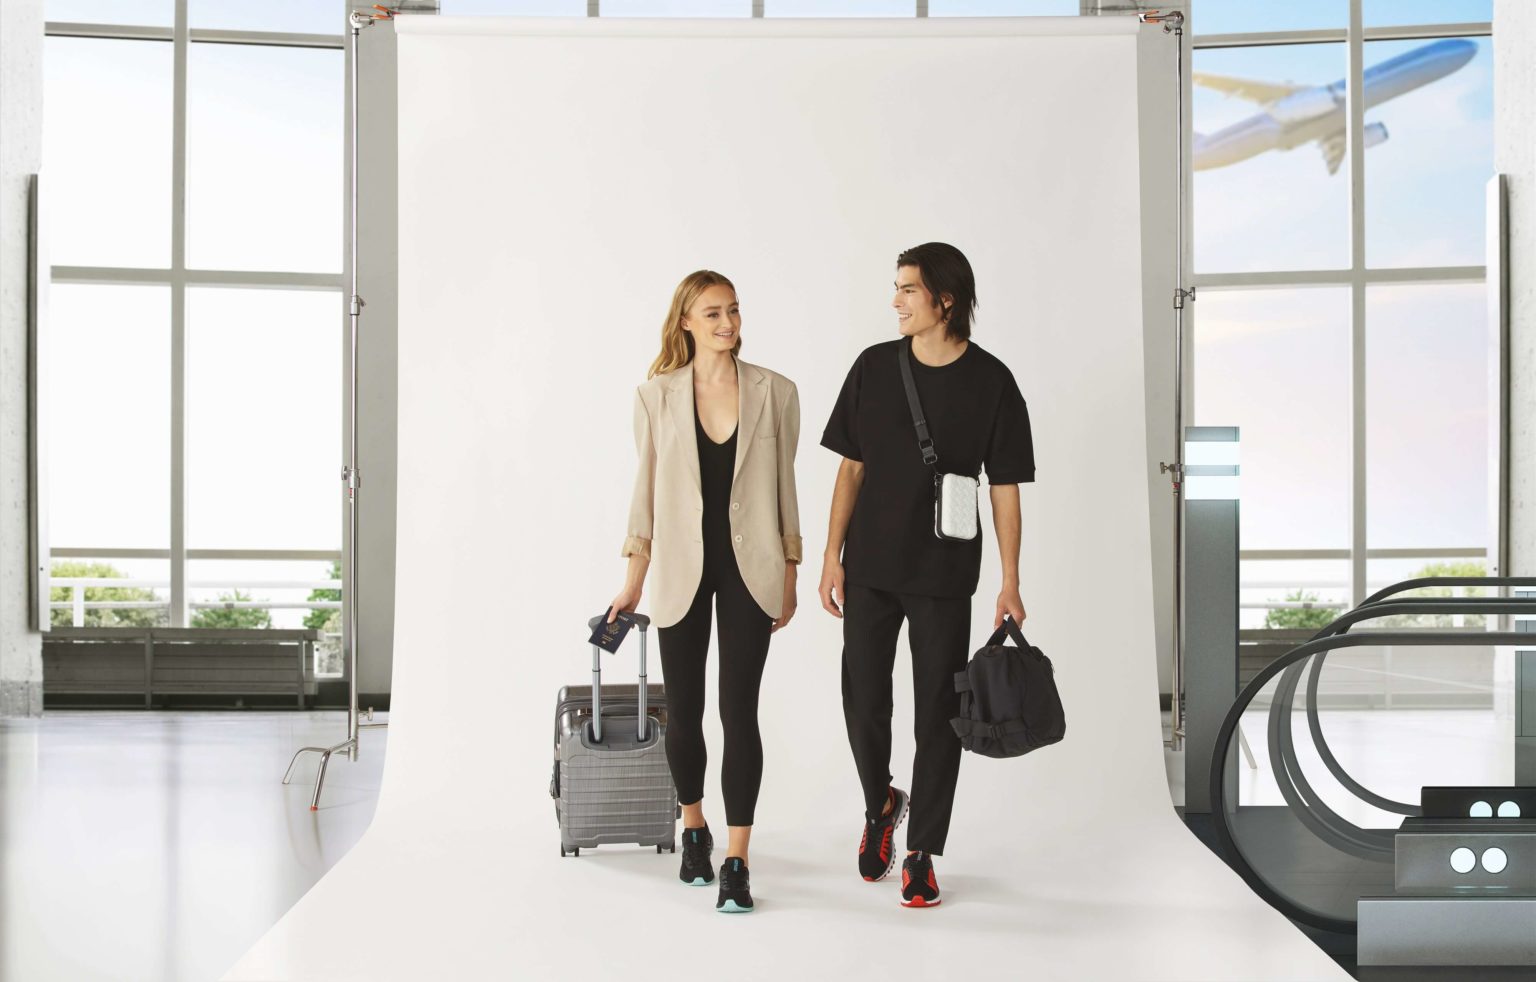 A male and female models in an airport backdrop carrying travel suitcase and a travel bag